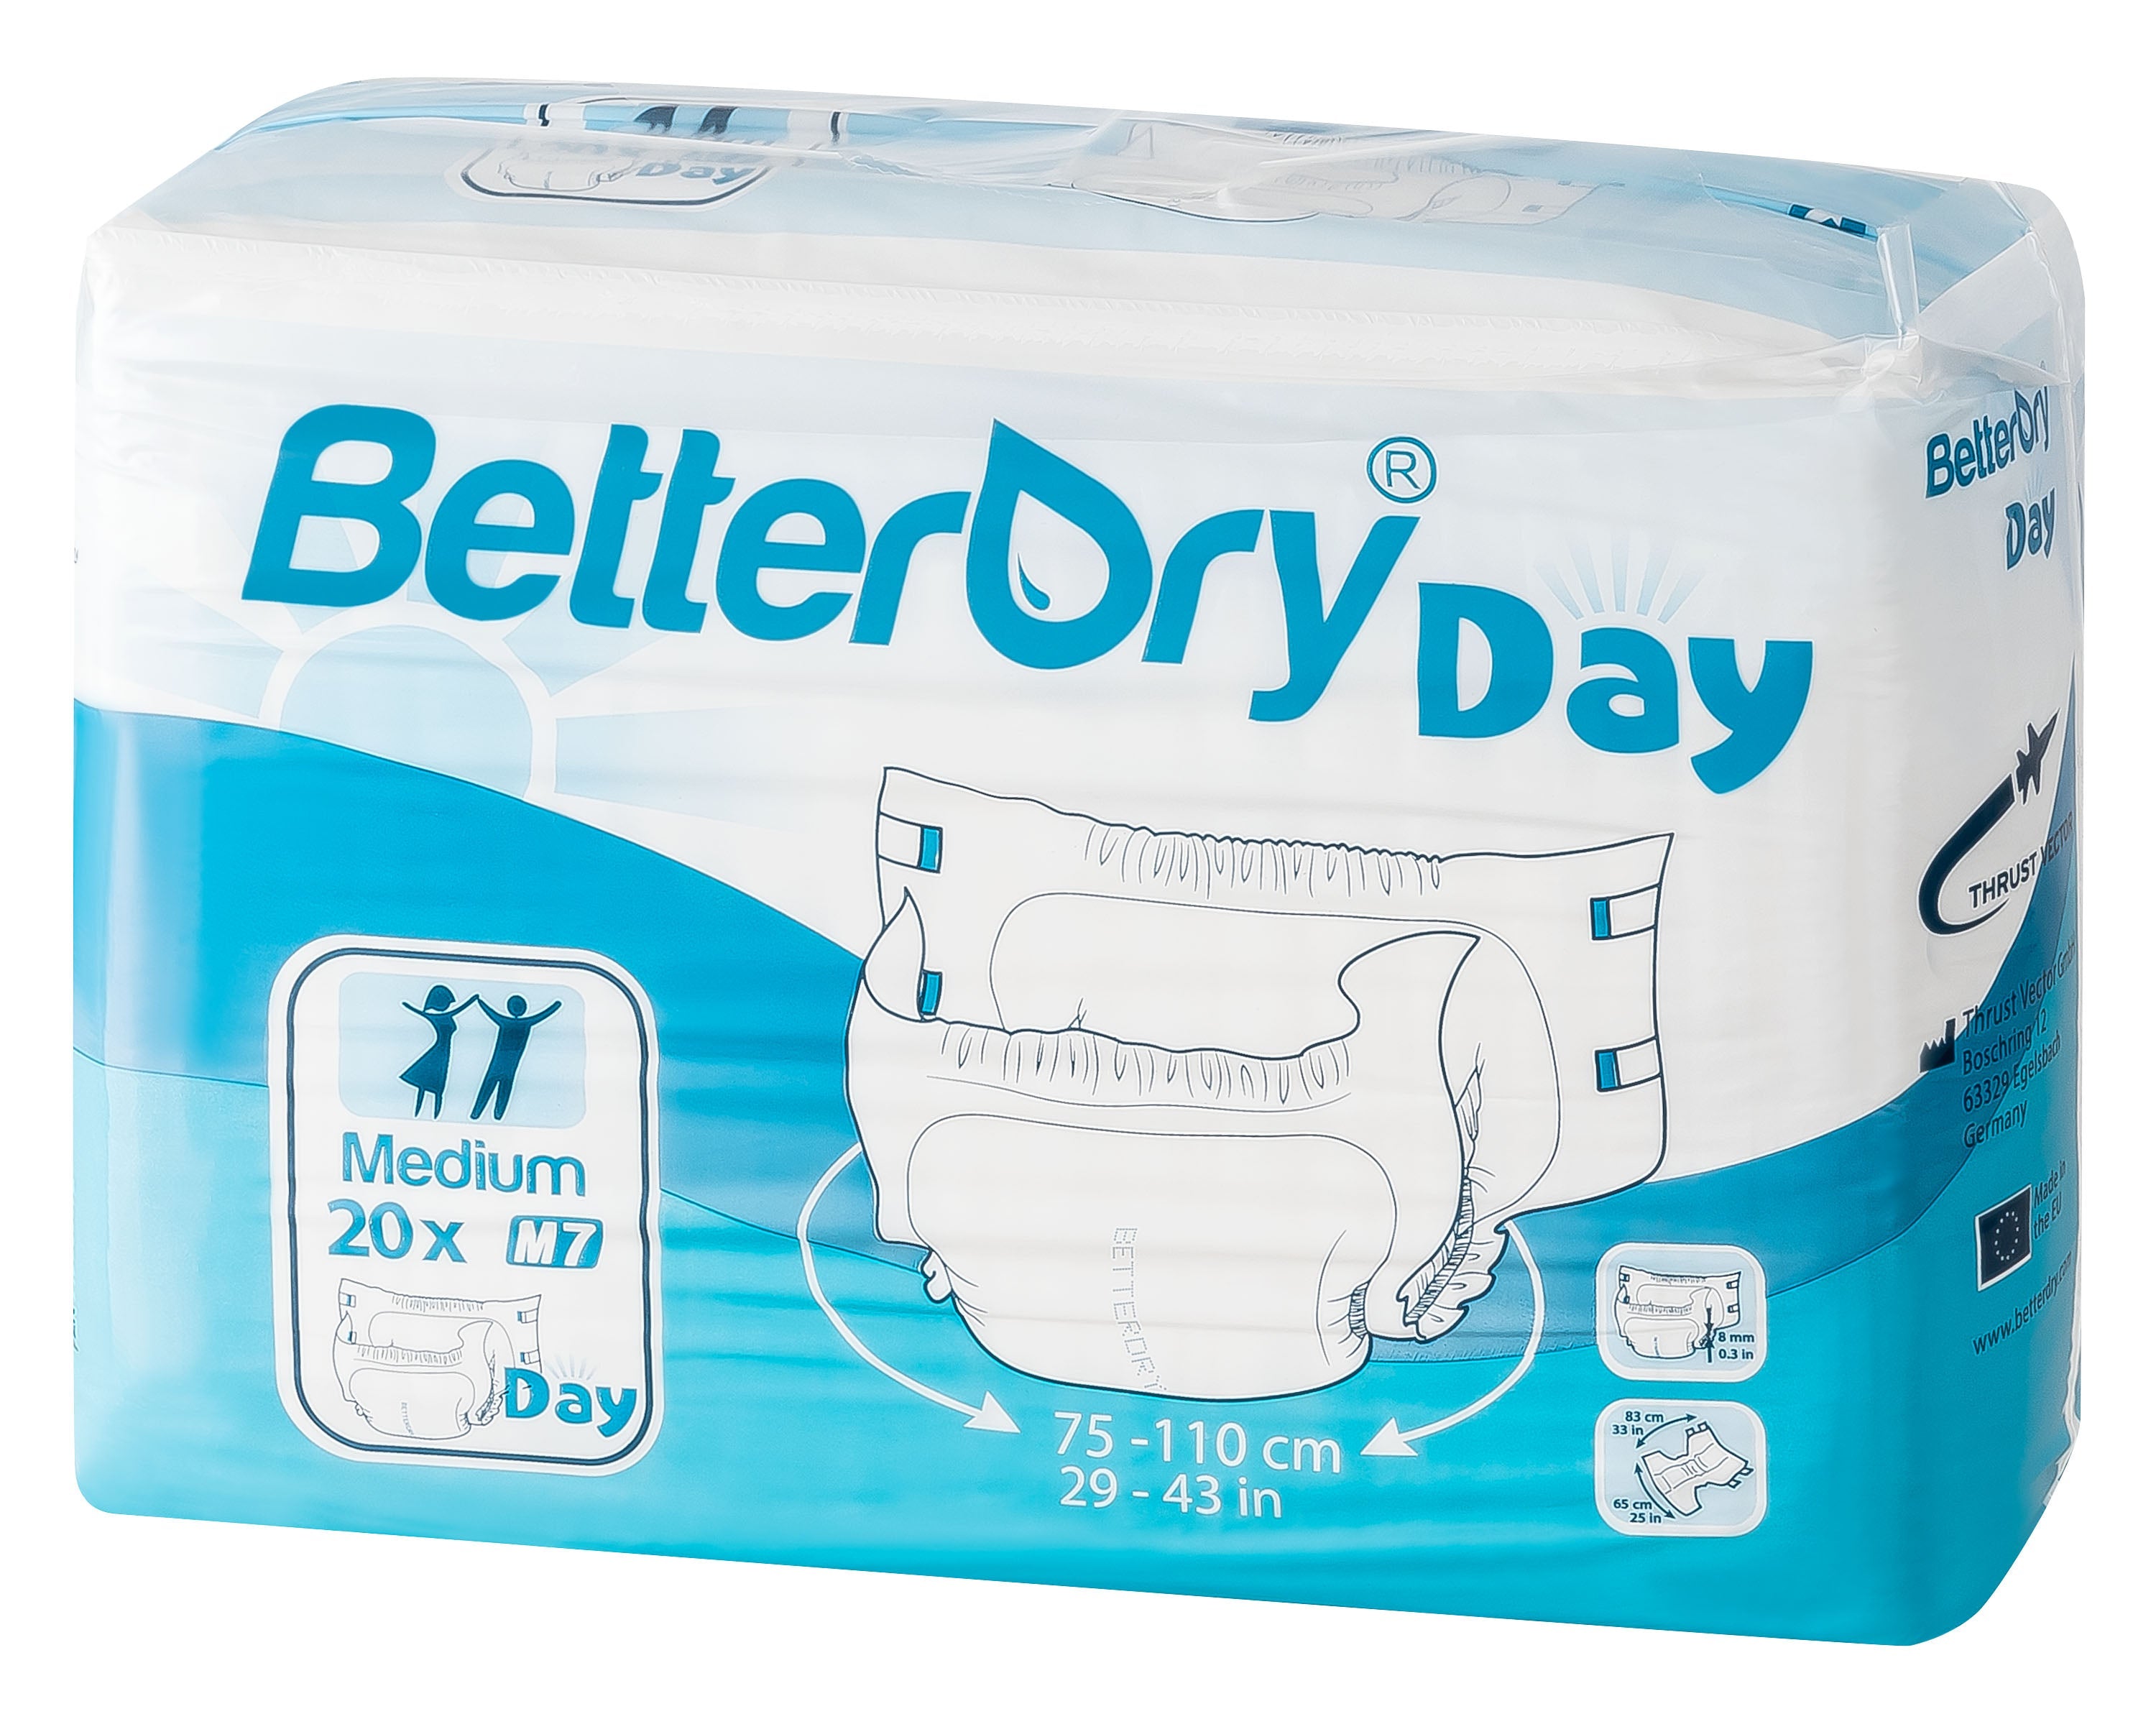 BetterDry 7 DAY Adult Diapers